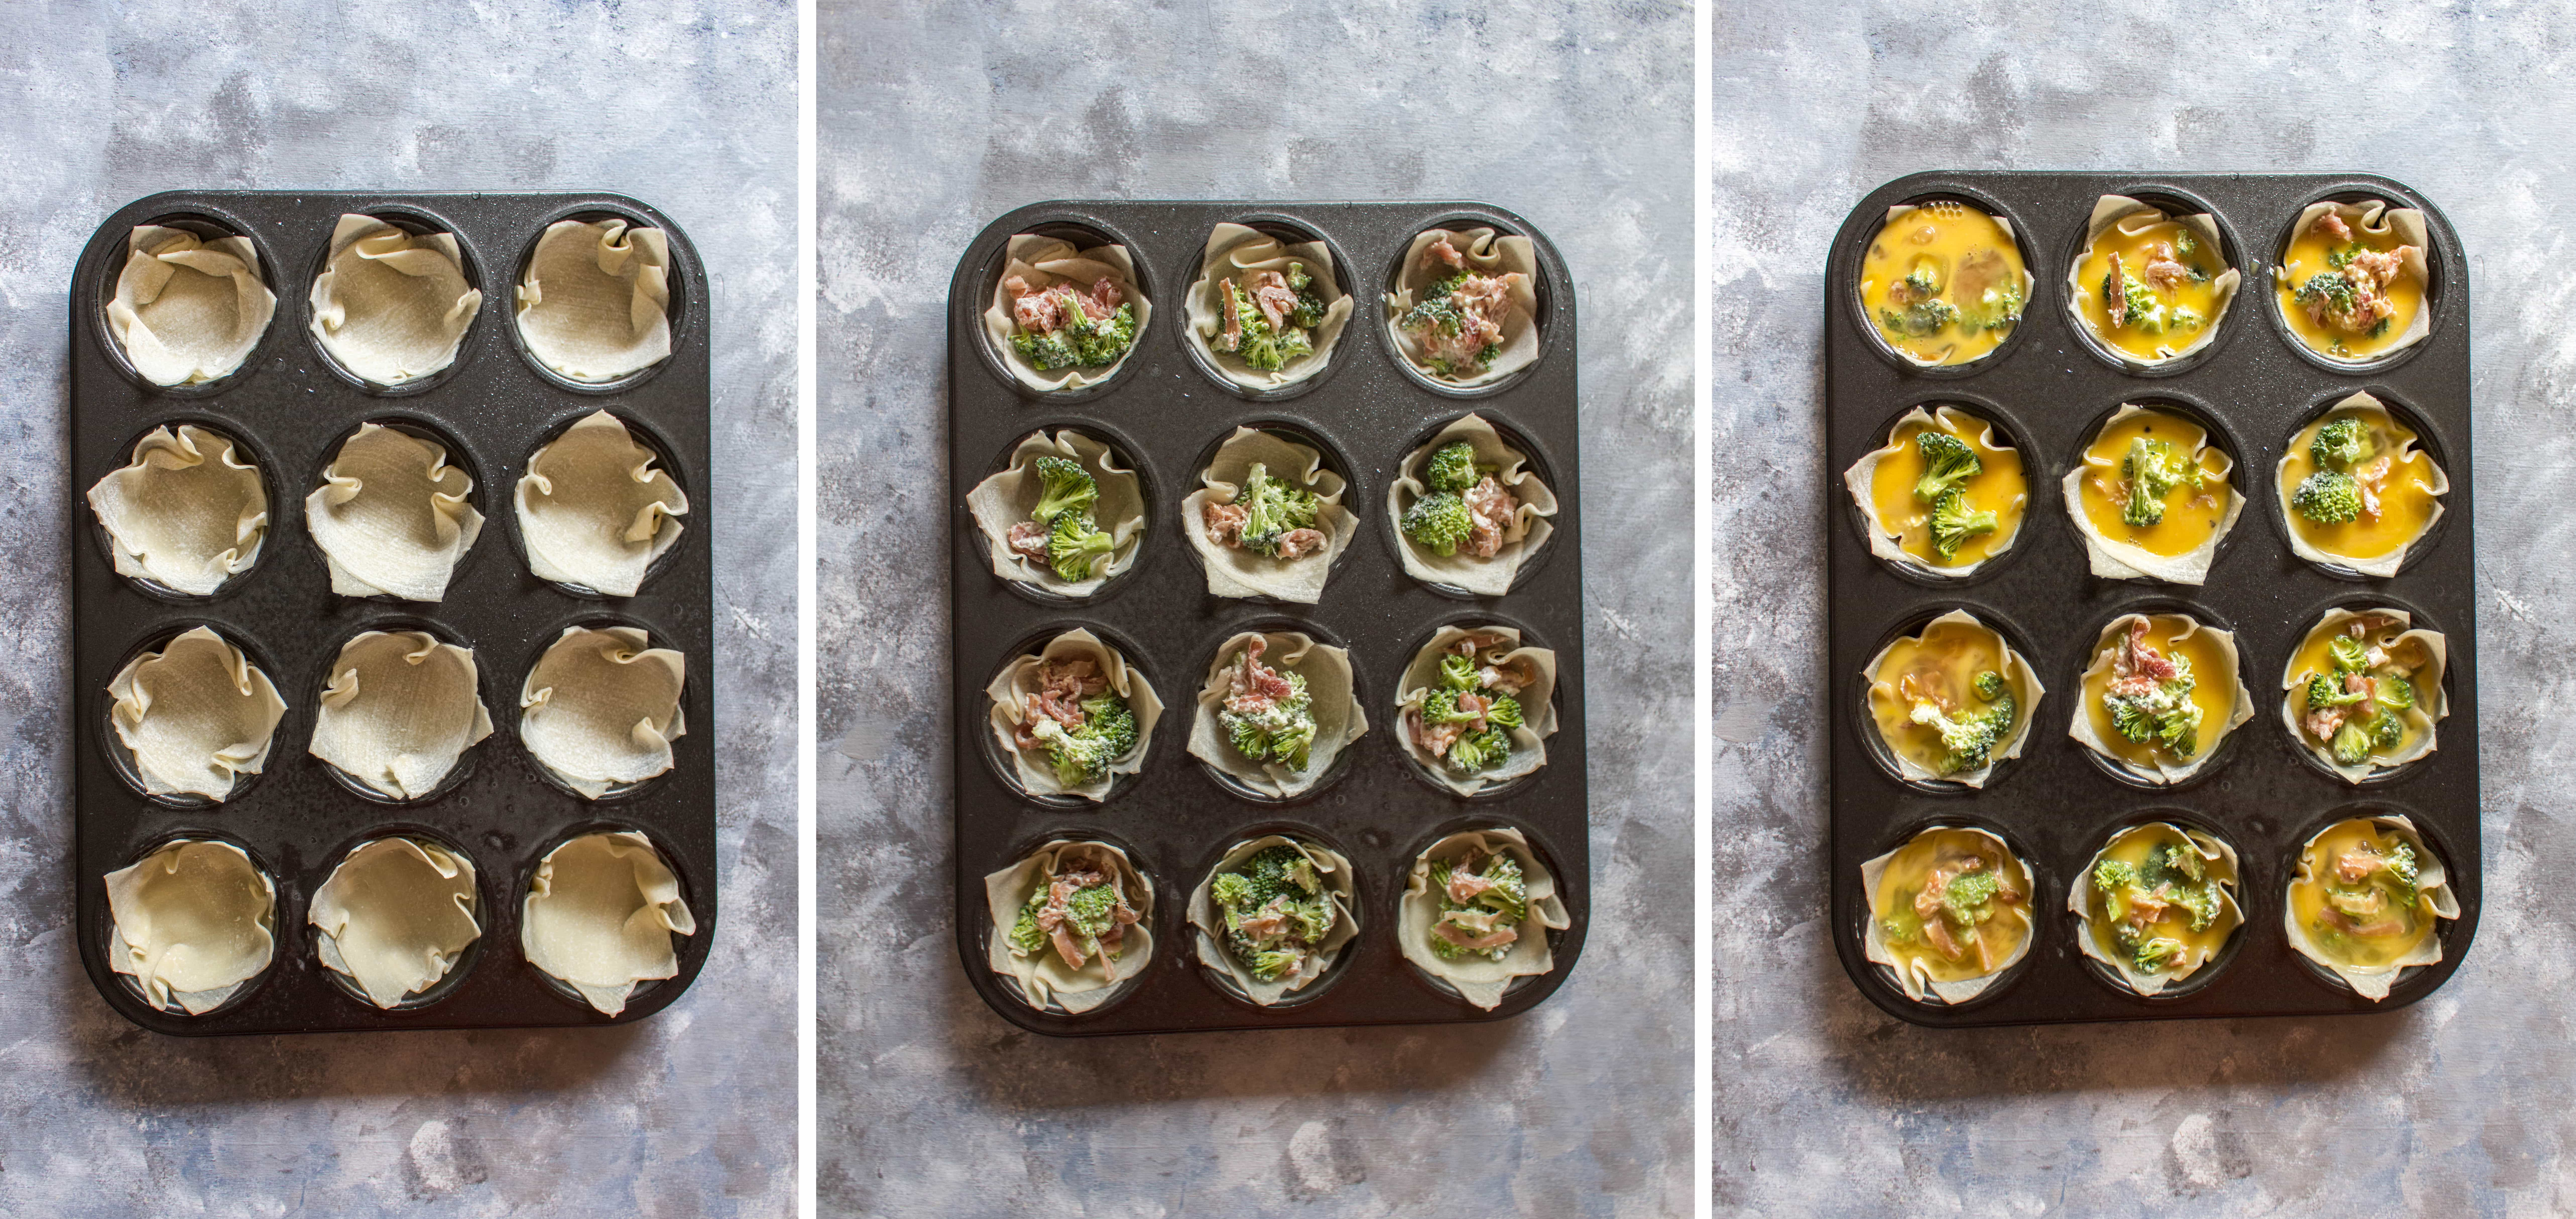 Need a breakfast meal prep idea? Why not try this delicious and fun breakfast wonton egg cups?